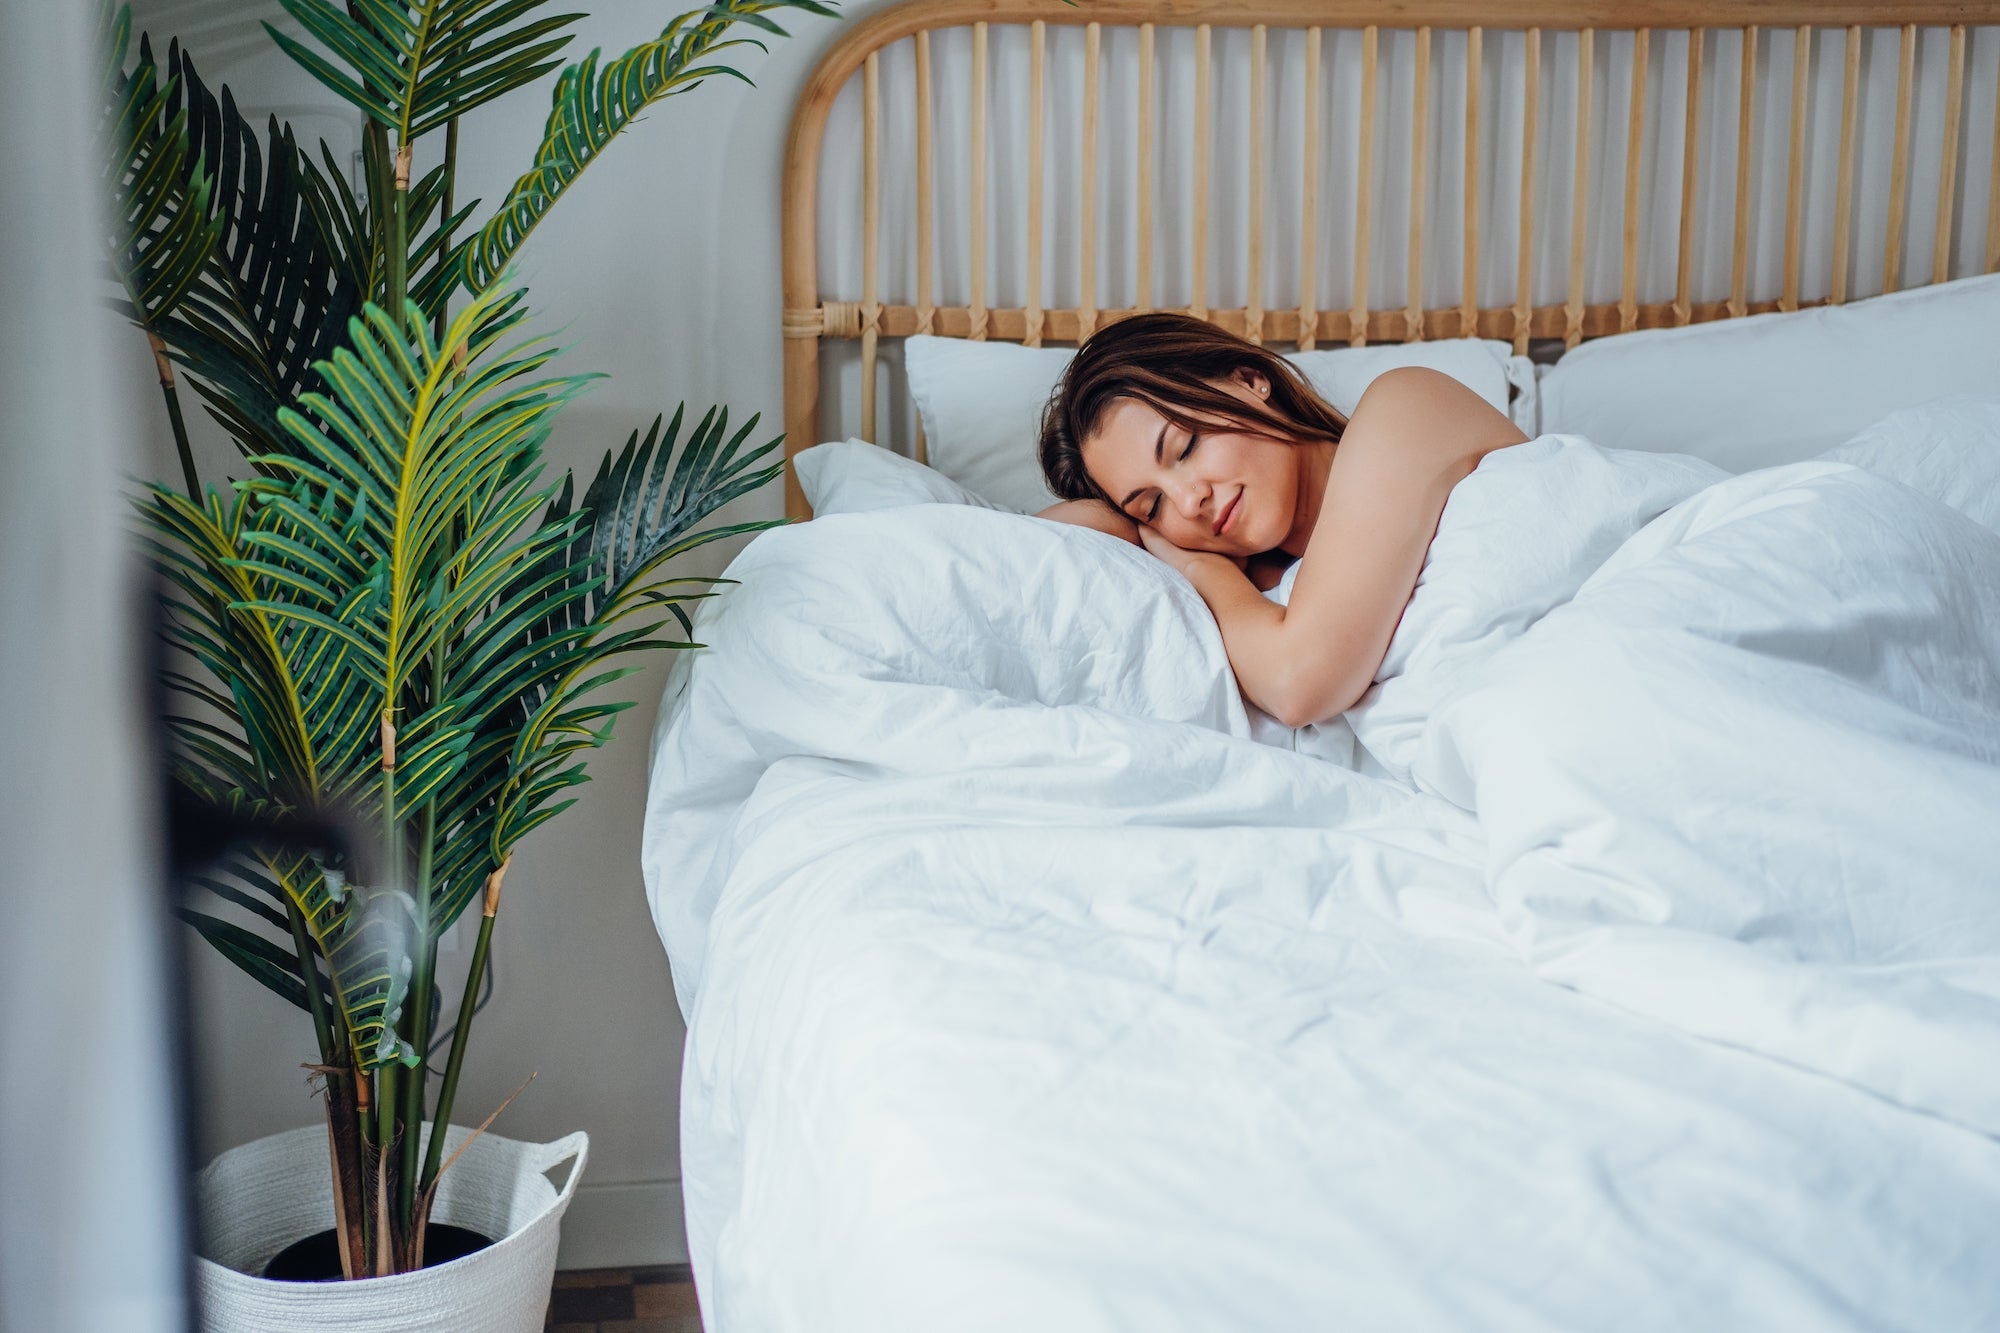 Our Guide to Sleeping Comfortably In Every Season